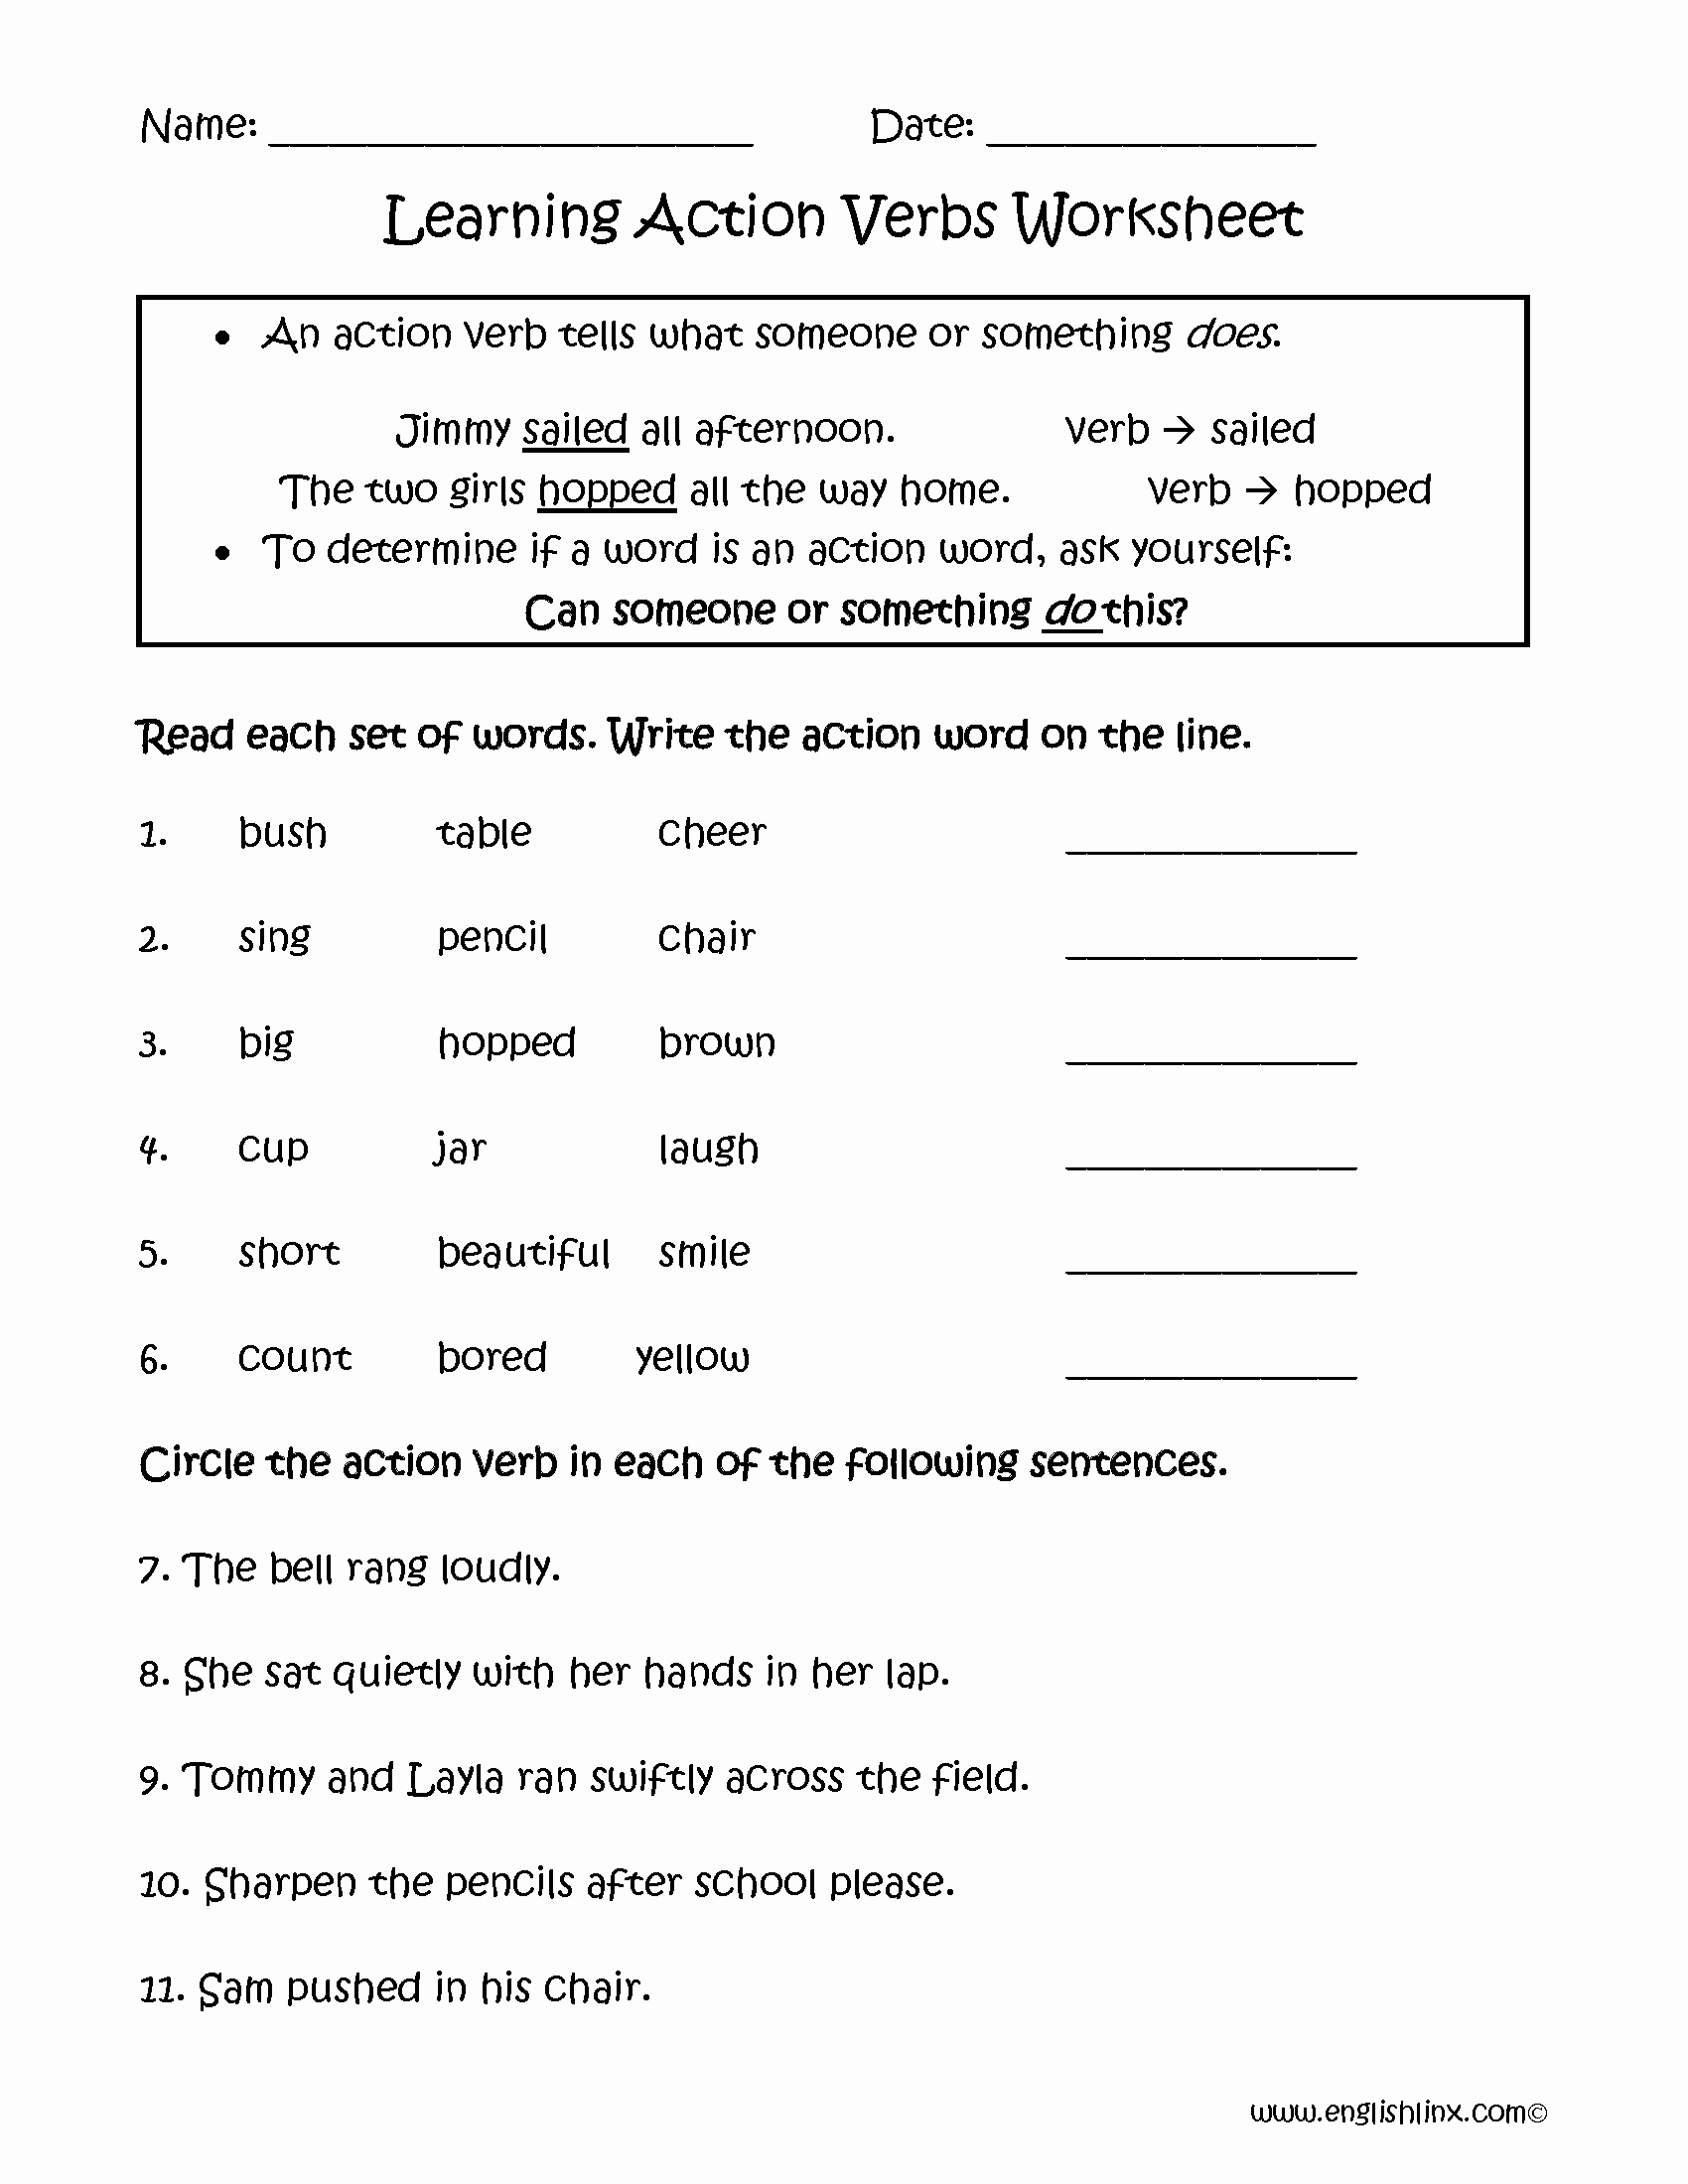 10 Best Images Of Subject Linking Verbs Worksheet Action And Linking 